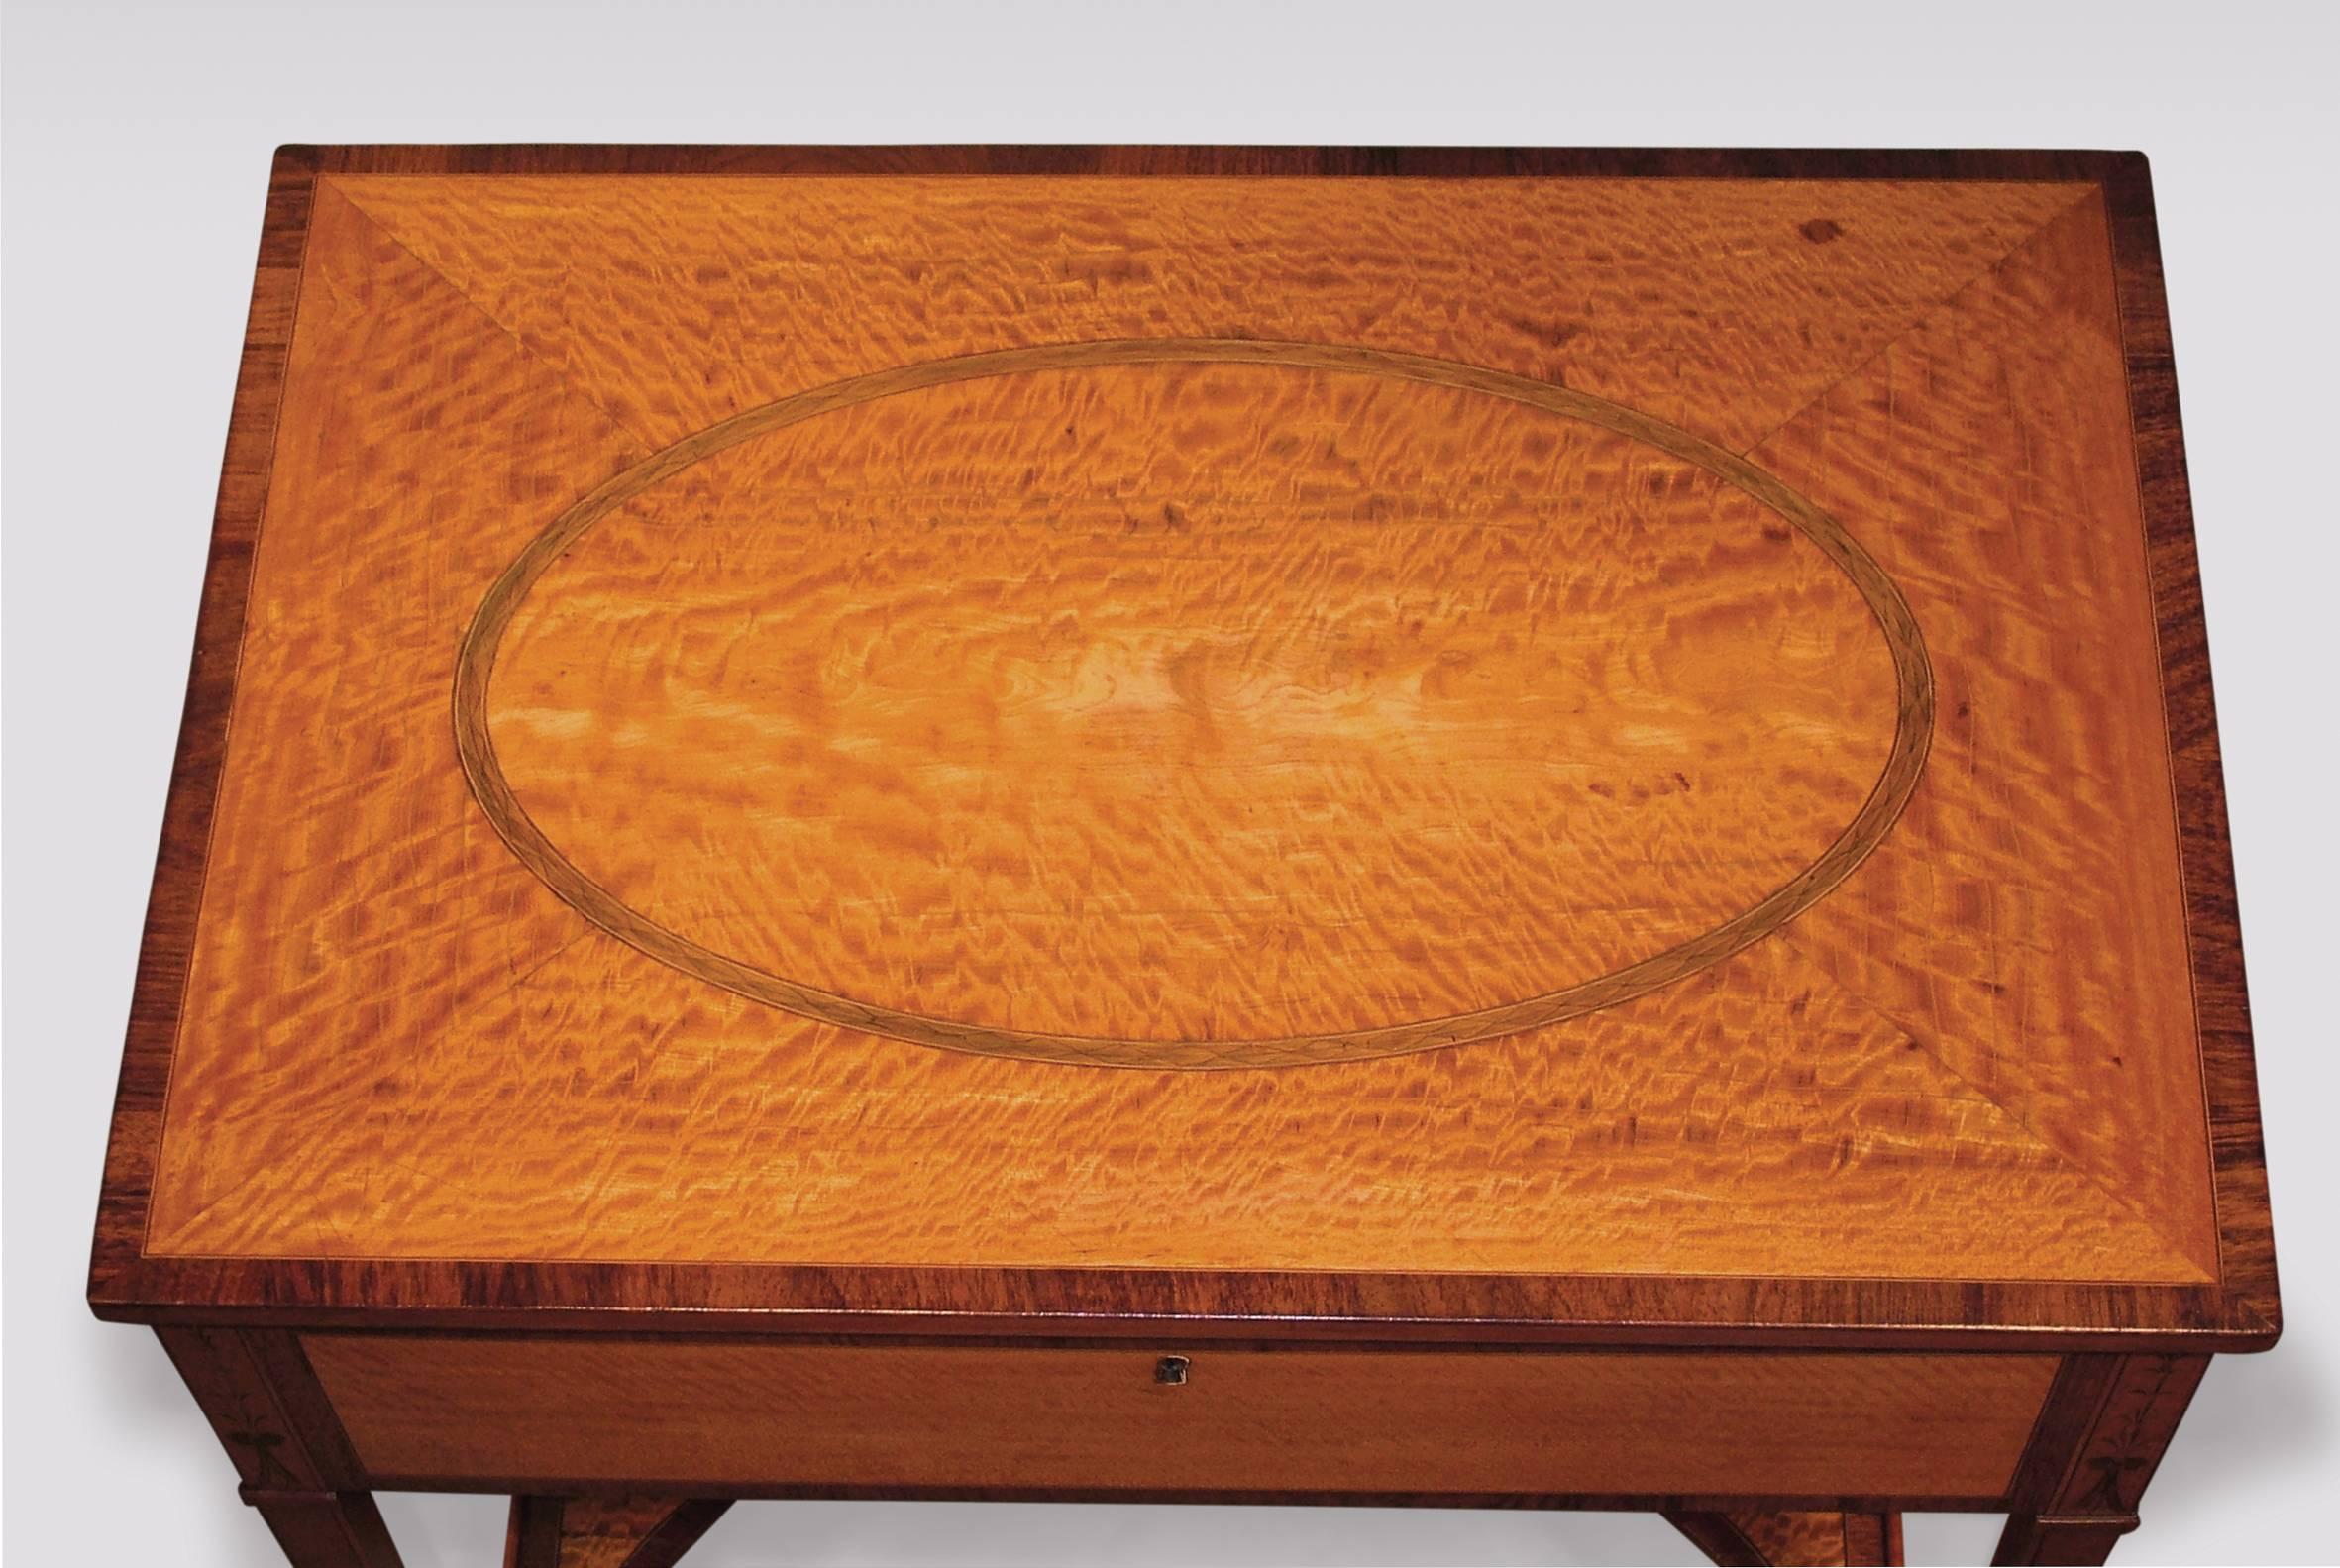 A fine Sheraton period satinwood occasional table rosewood crossbanded and ebony and boxwood strung throughout, having segmented top with central oval panel. The Table, with lift-up top enclosing mirror and various compartments supported on square